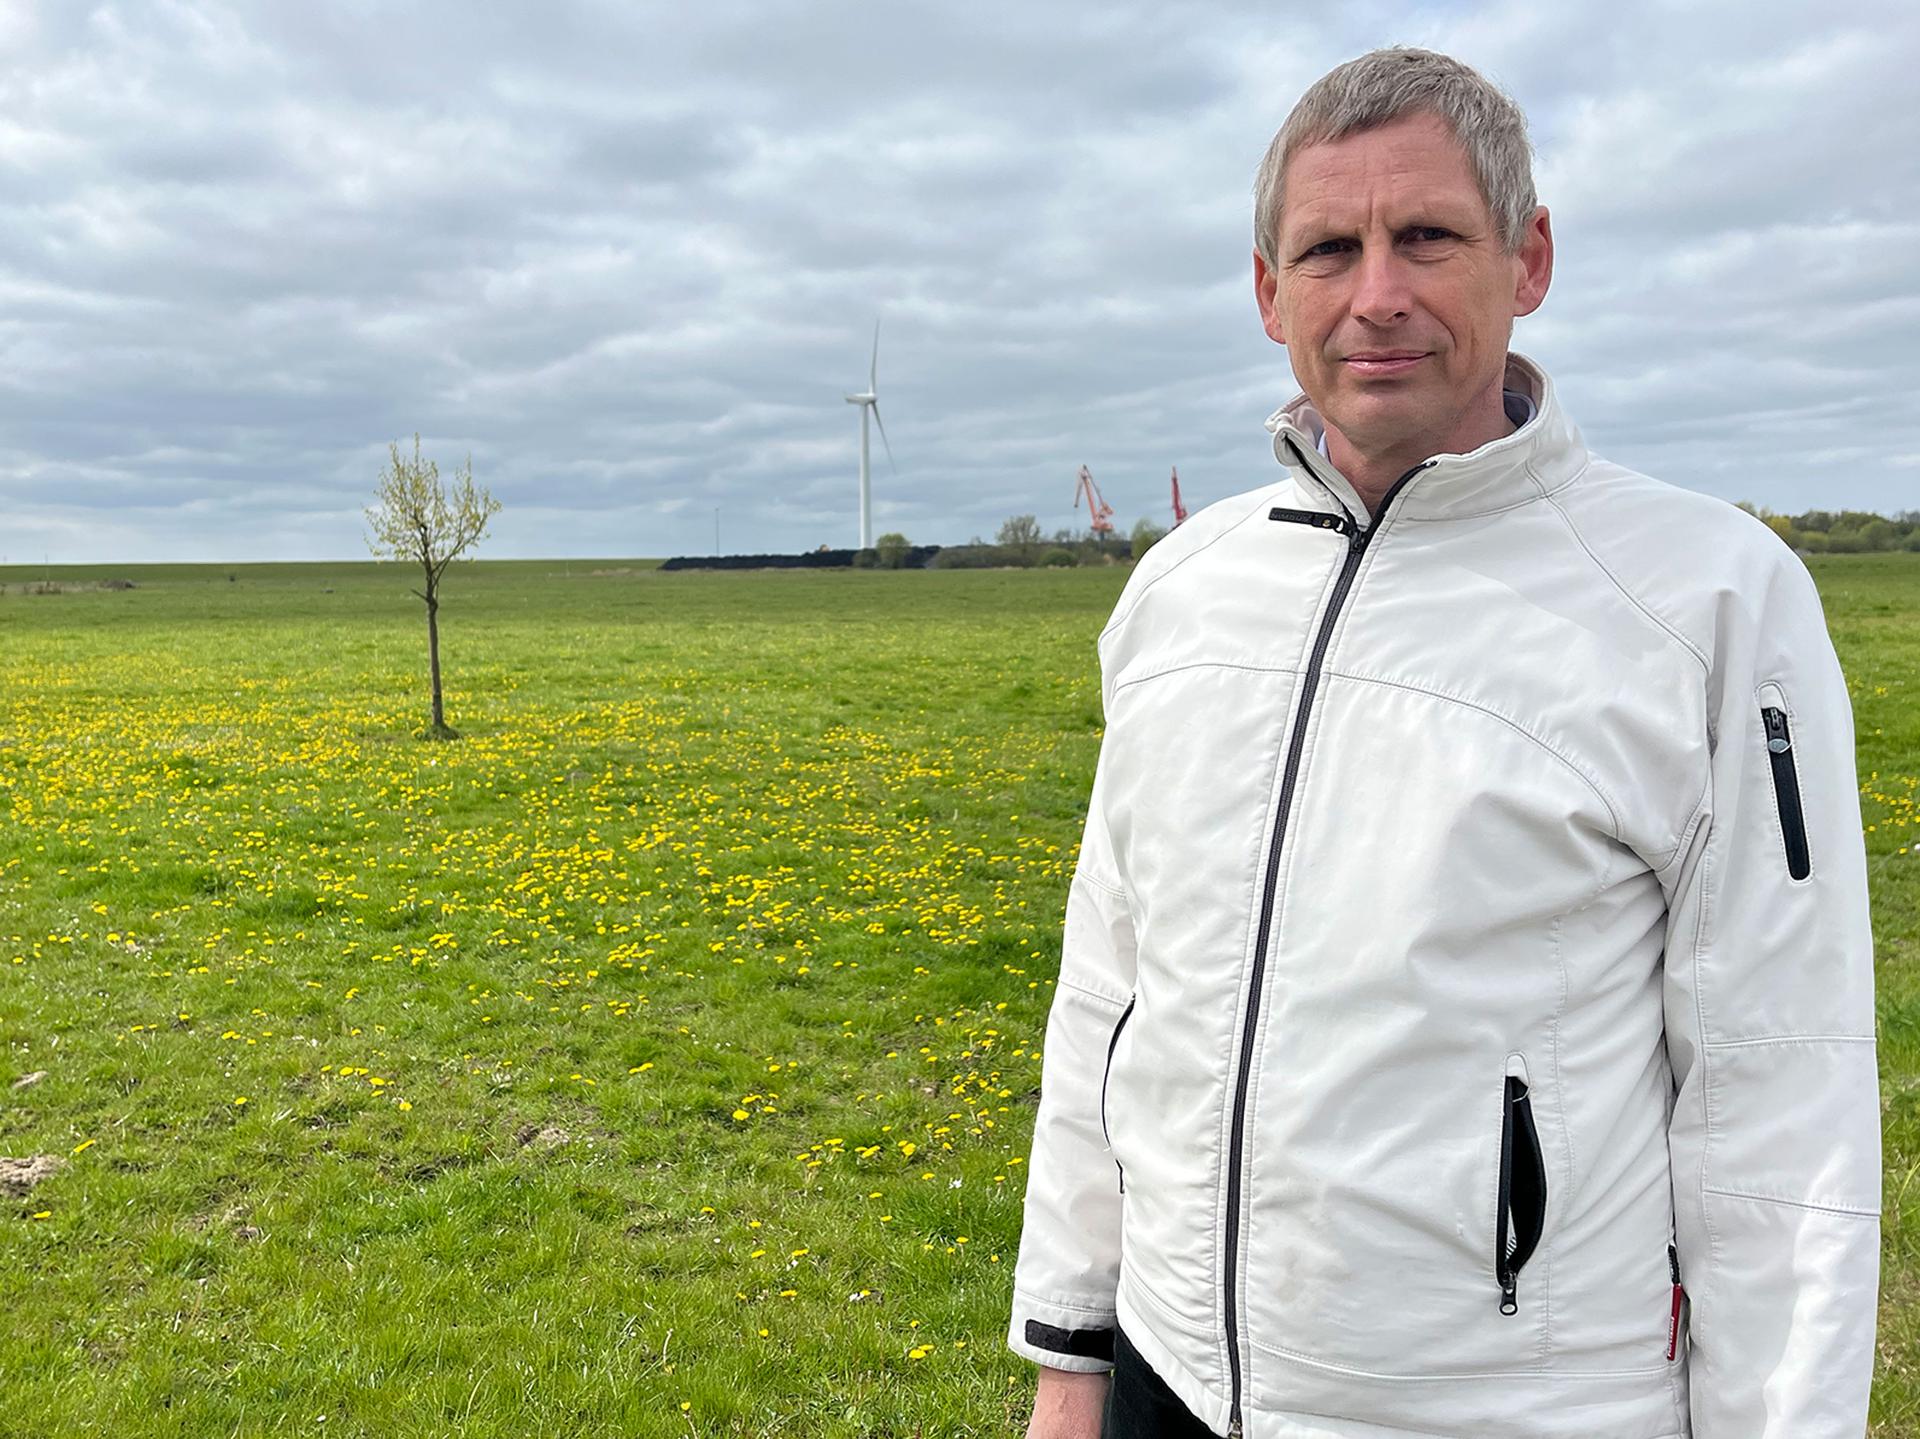 Reinhard Knof near the site of a planned natural gas terminal in Brunsbüttel, Germany